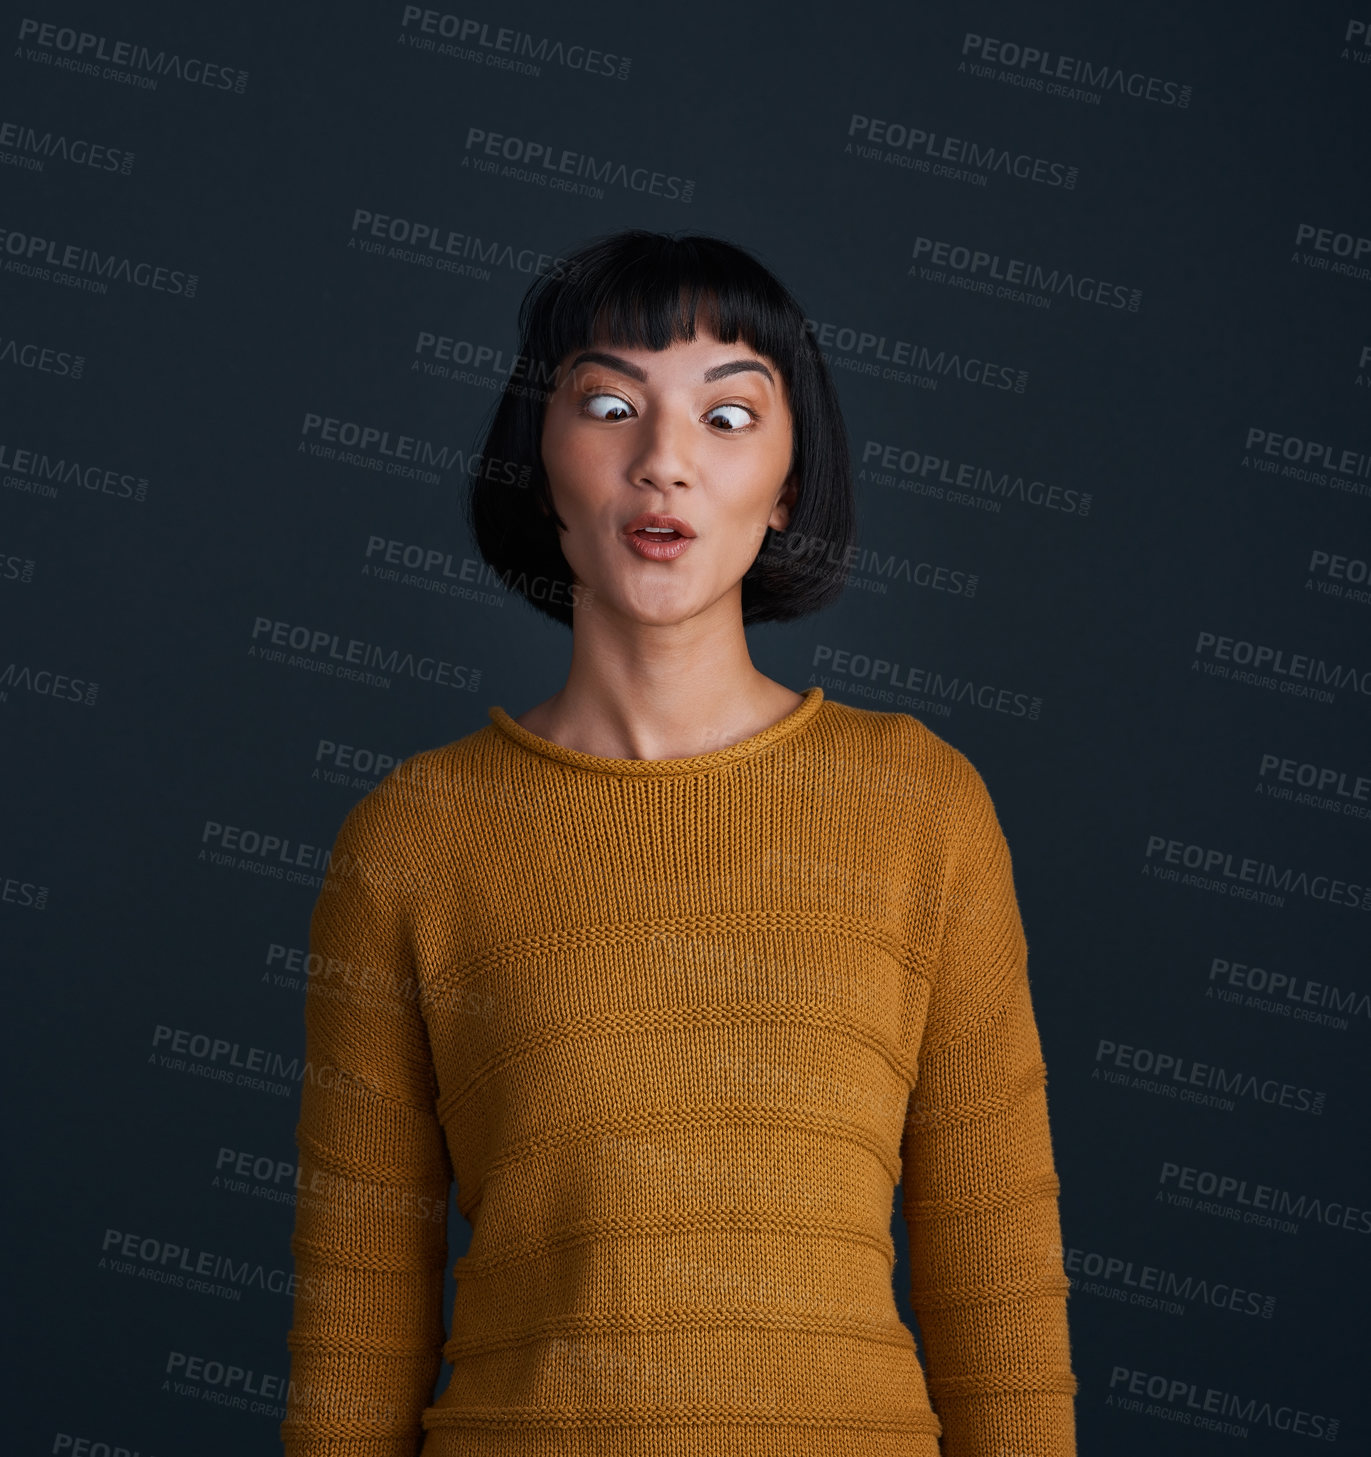 Buy stock photo Studio shot of an attractive young woman crossing her eyes against a dark background